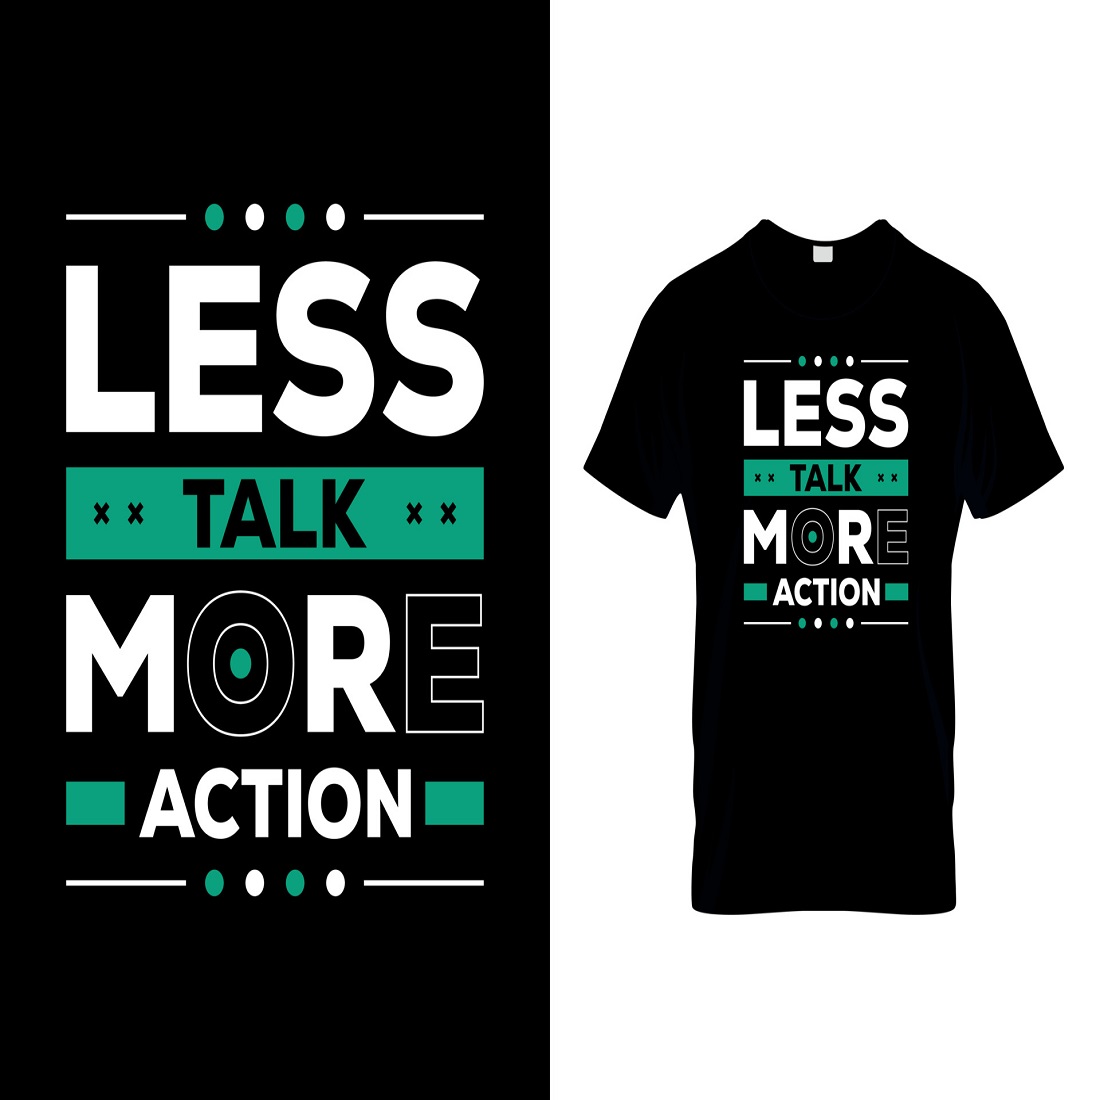 Less talk more action t-shirts design cover image.